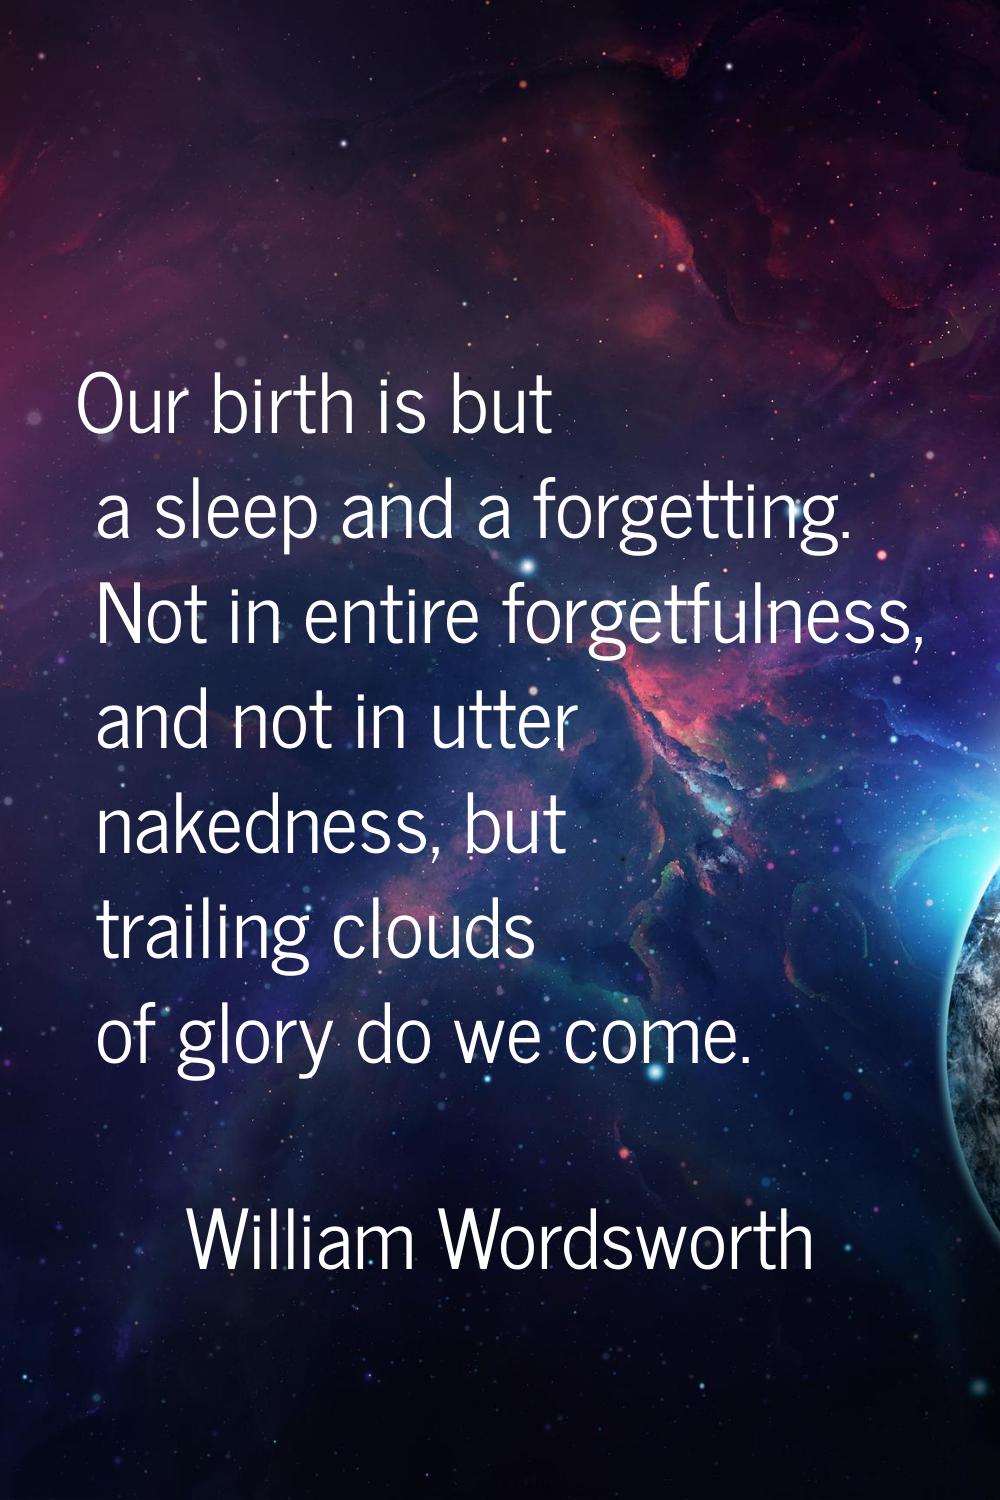 Our birth is but a sleep and a forgetting. Not in entire forgetfulness, and not in utter nakedness,